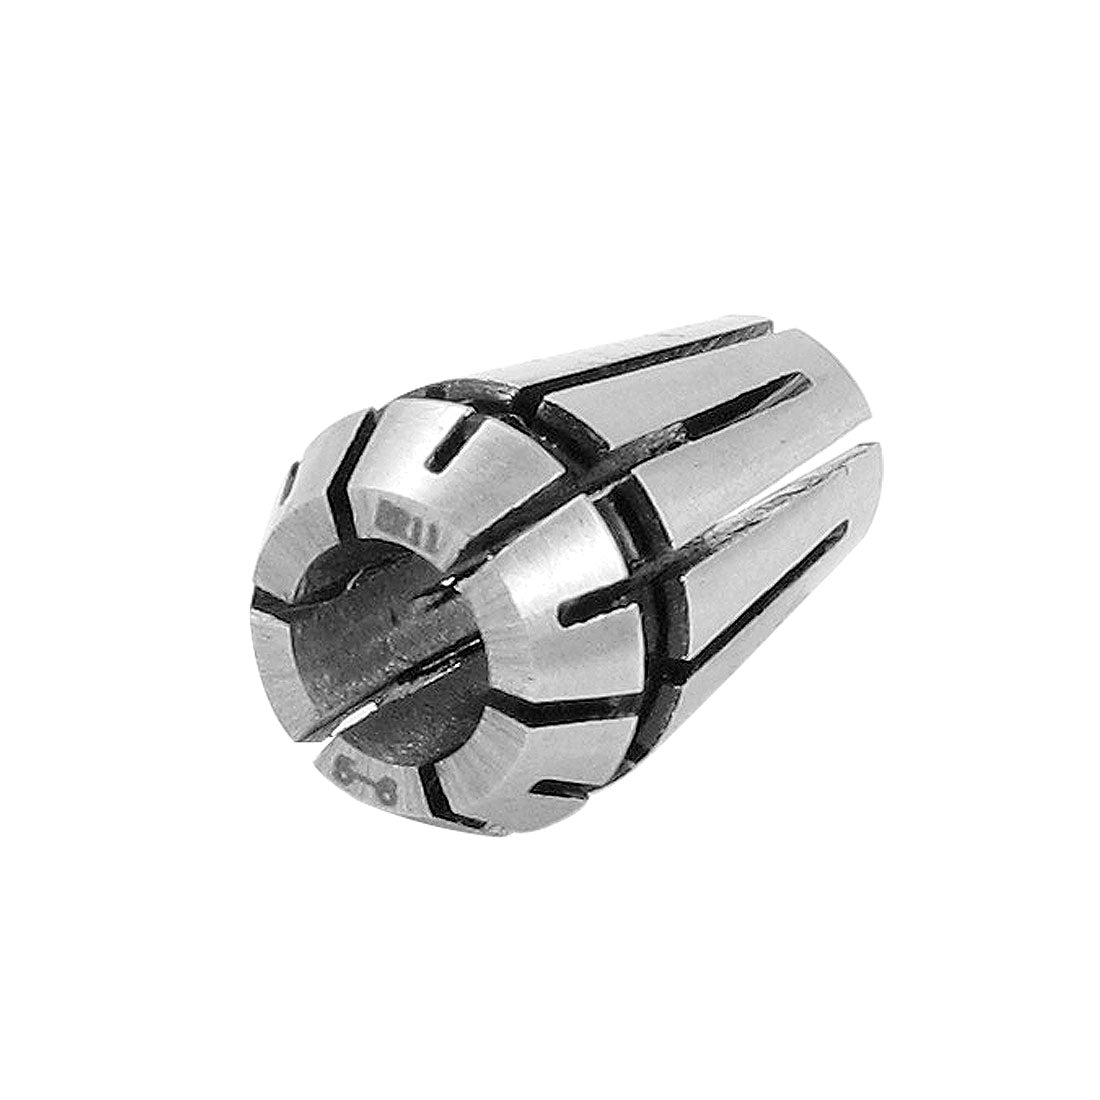 uxcell Uxcell Clamping Range 5-6mm ER11 Precision Spring Collet Reaming Part